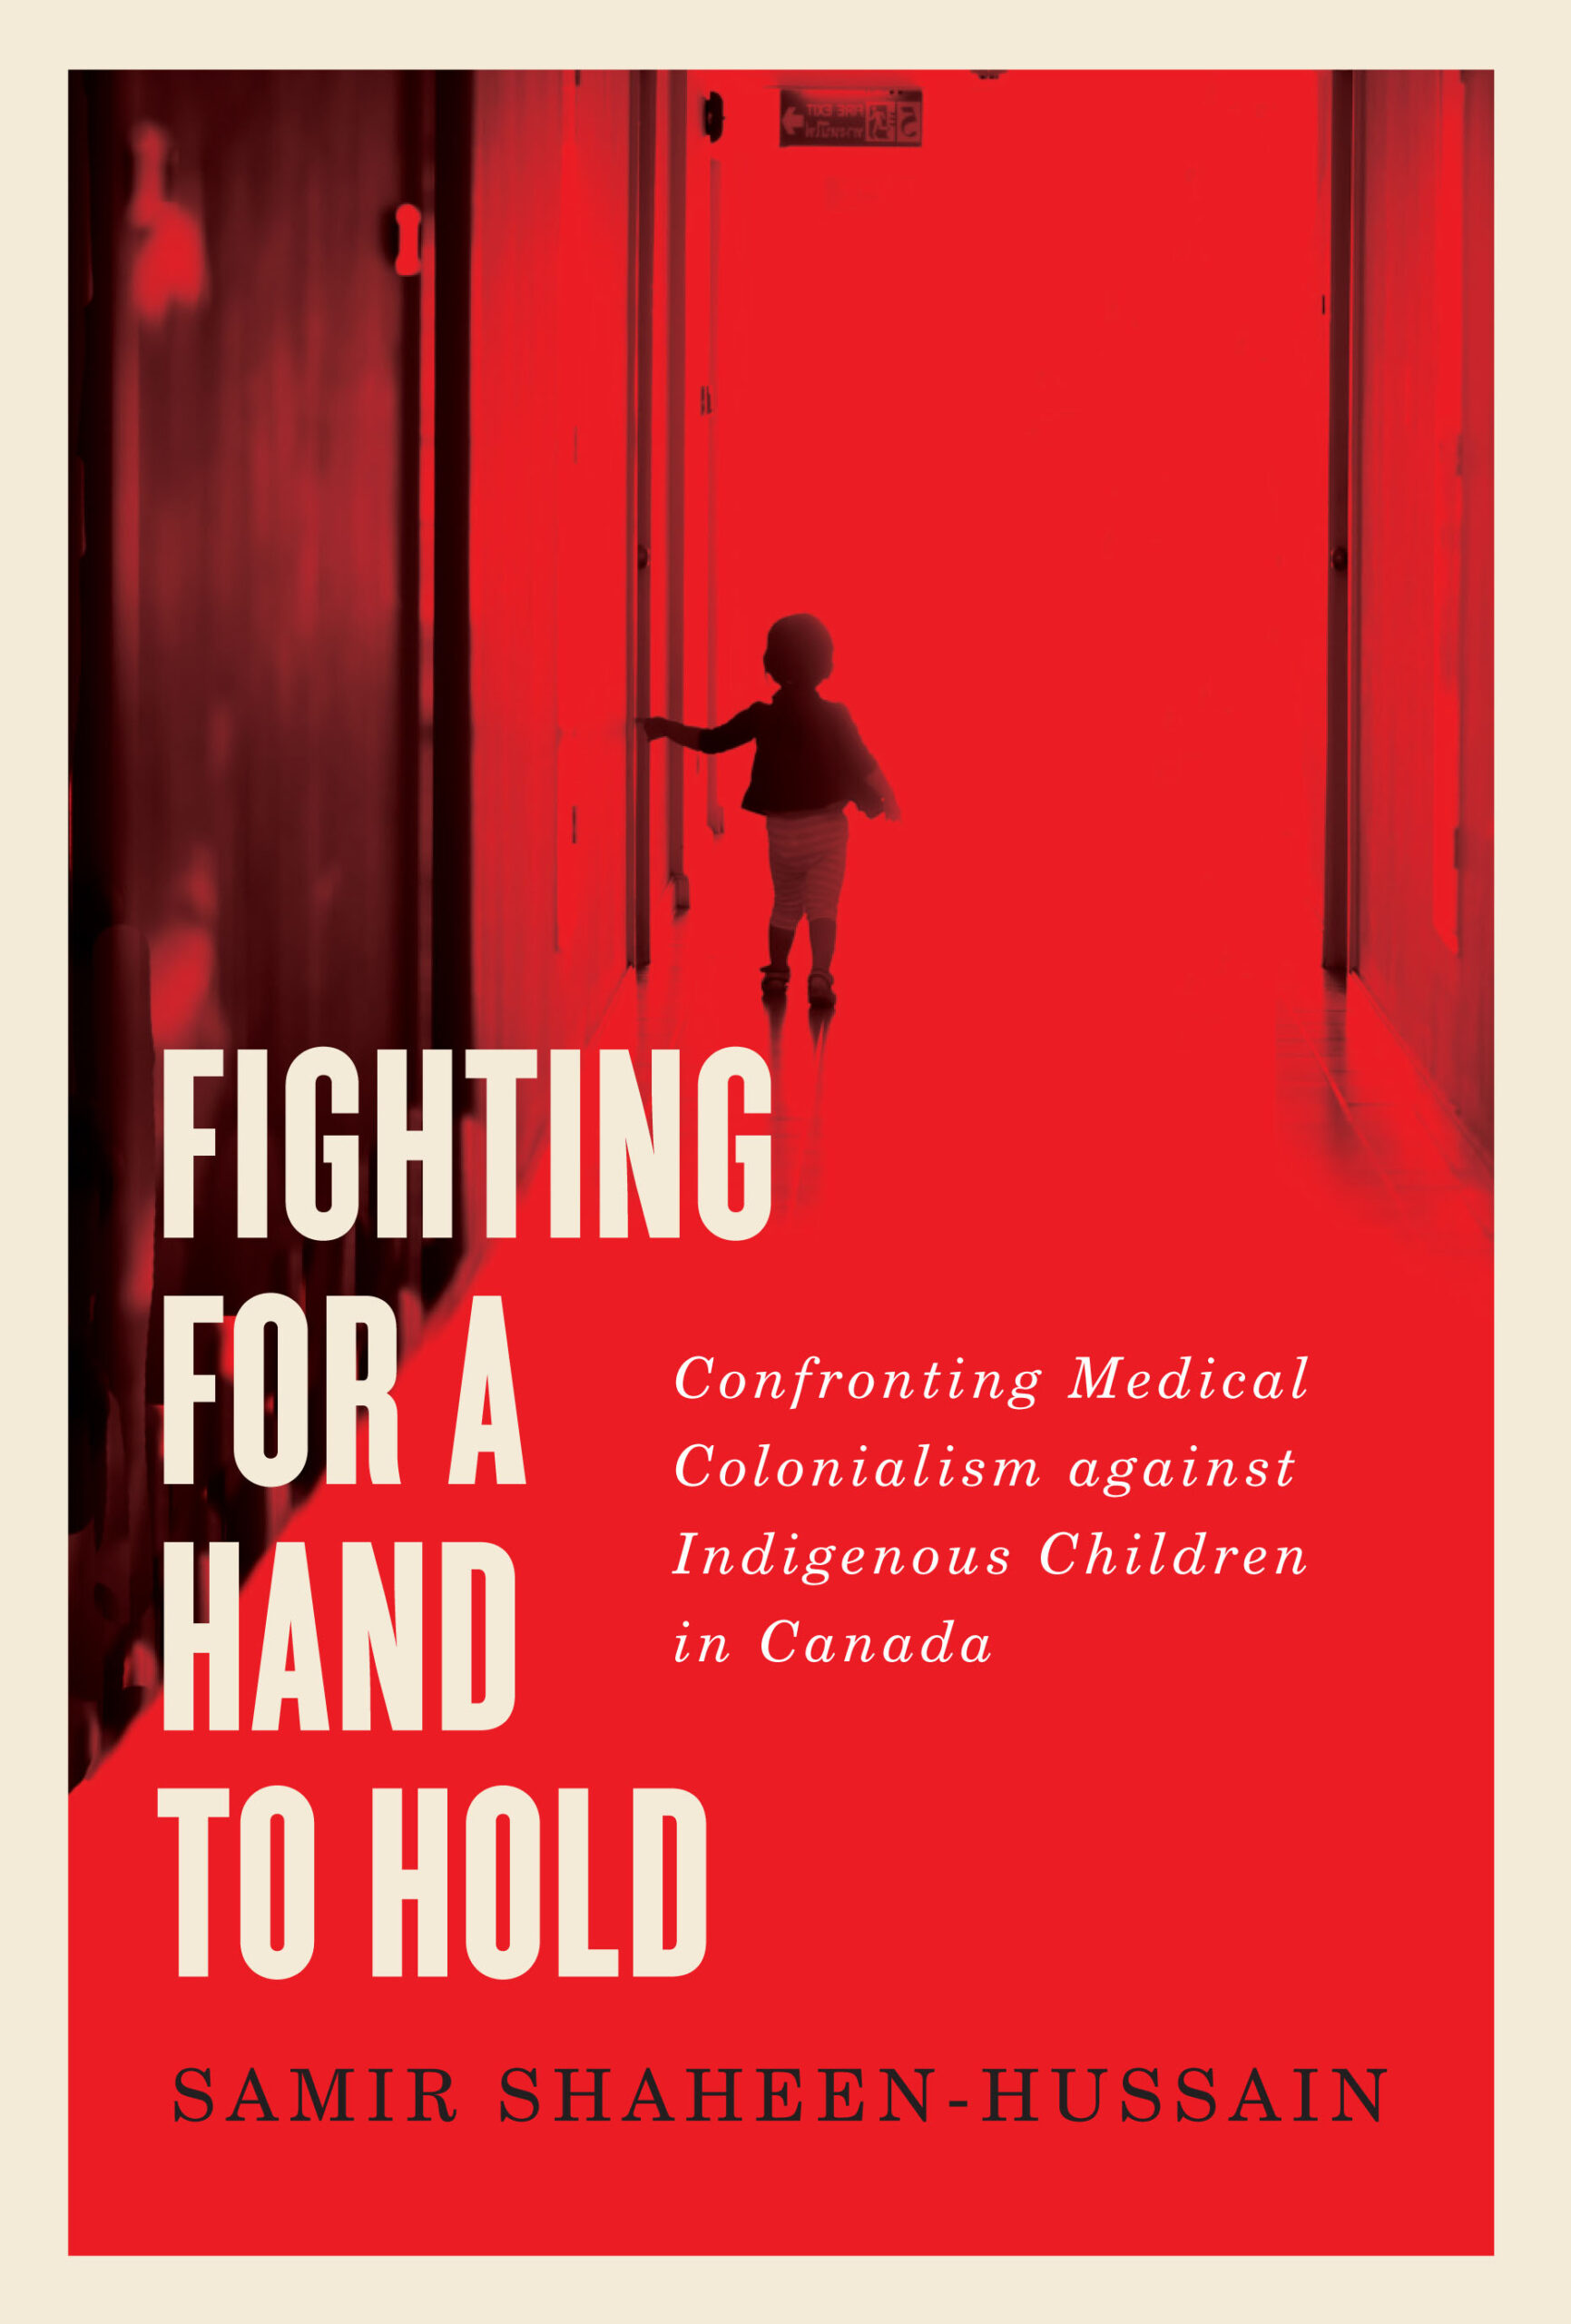 Fighting for a Hand to Hold: Confronting Medical Colonialism against Indigenous Children in Canada